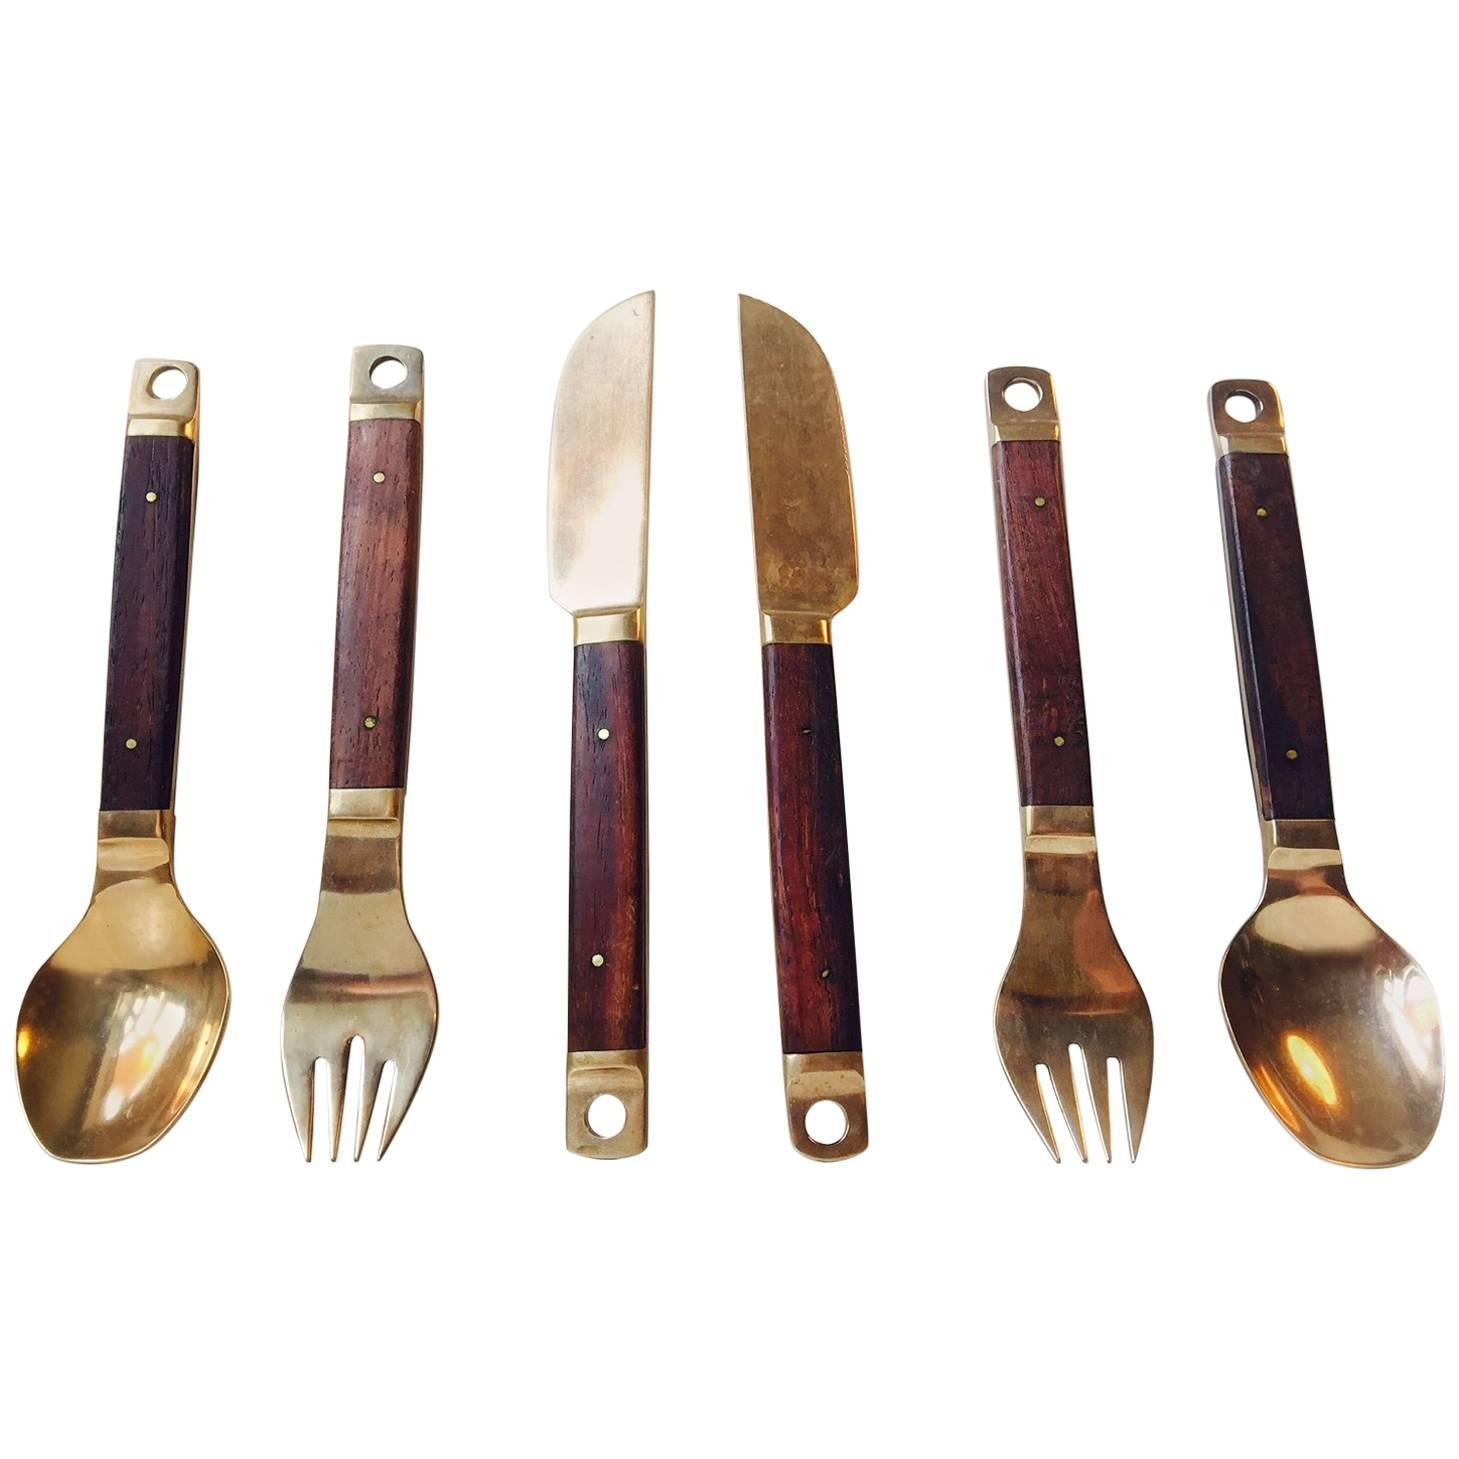 Danish Mid-Century Brass and Teak Cutlery, Flatware Set, 36 Pieces by Carl Cohr